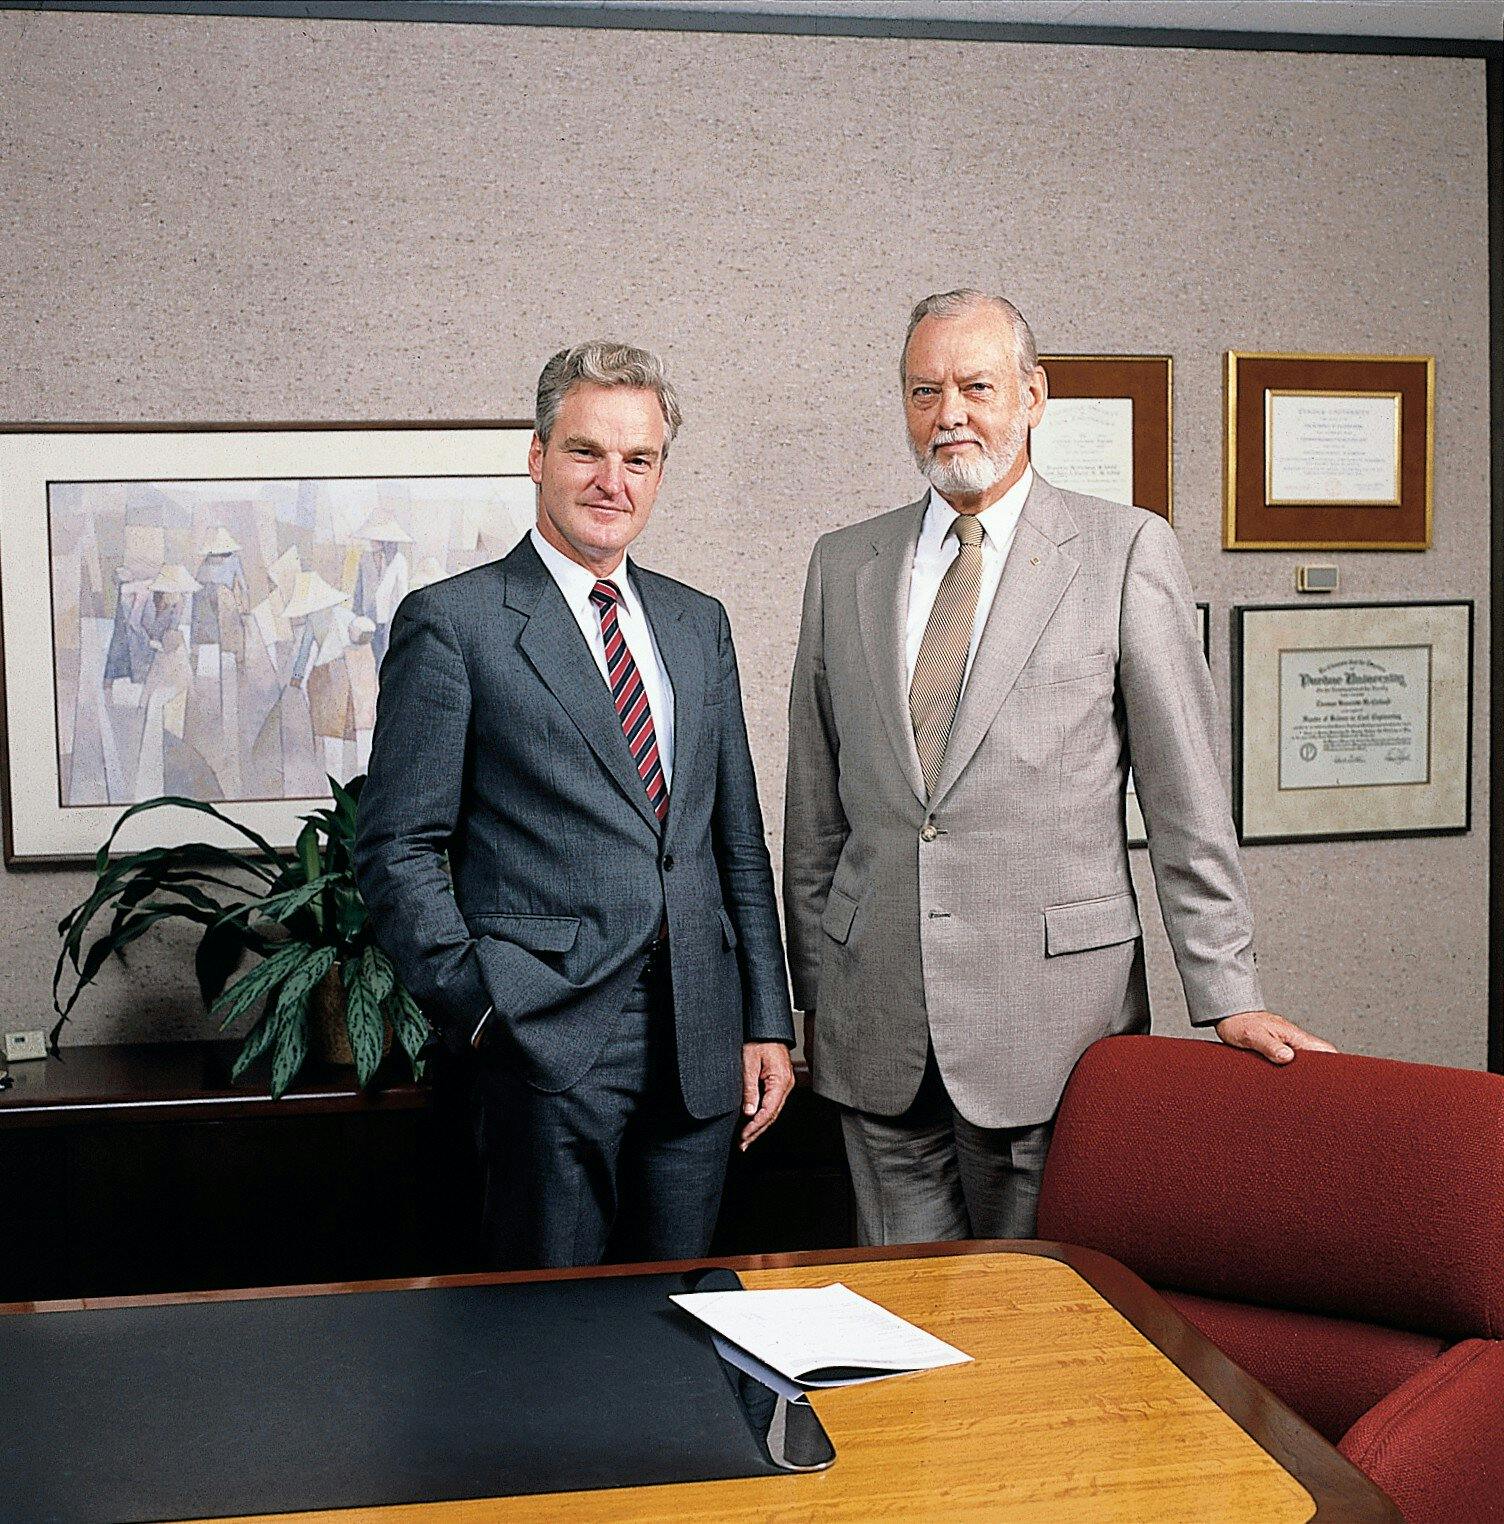 Gert-Jan Kramer and Bramlette McClelland
Images from Fugro 40 year anniversary book page 201